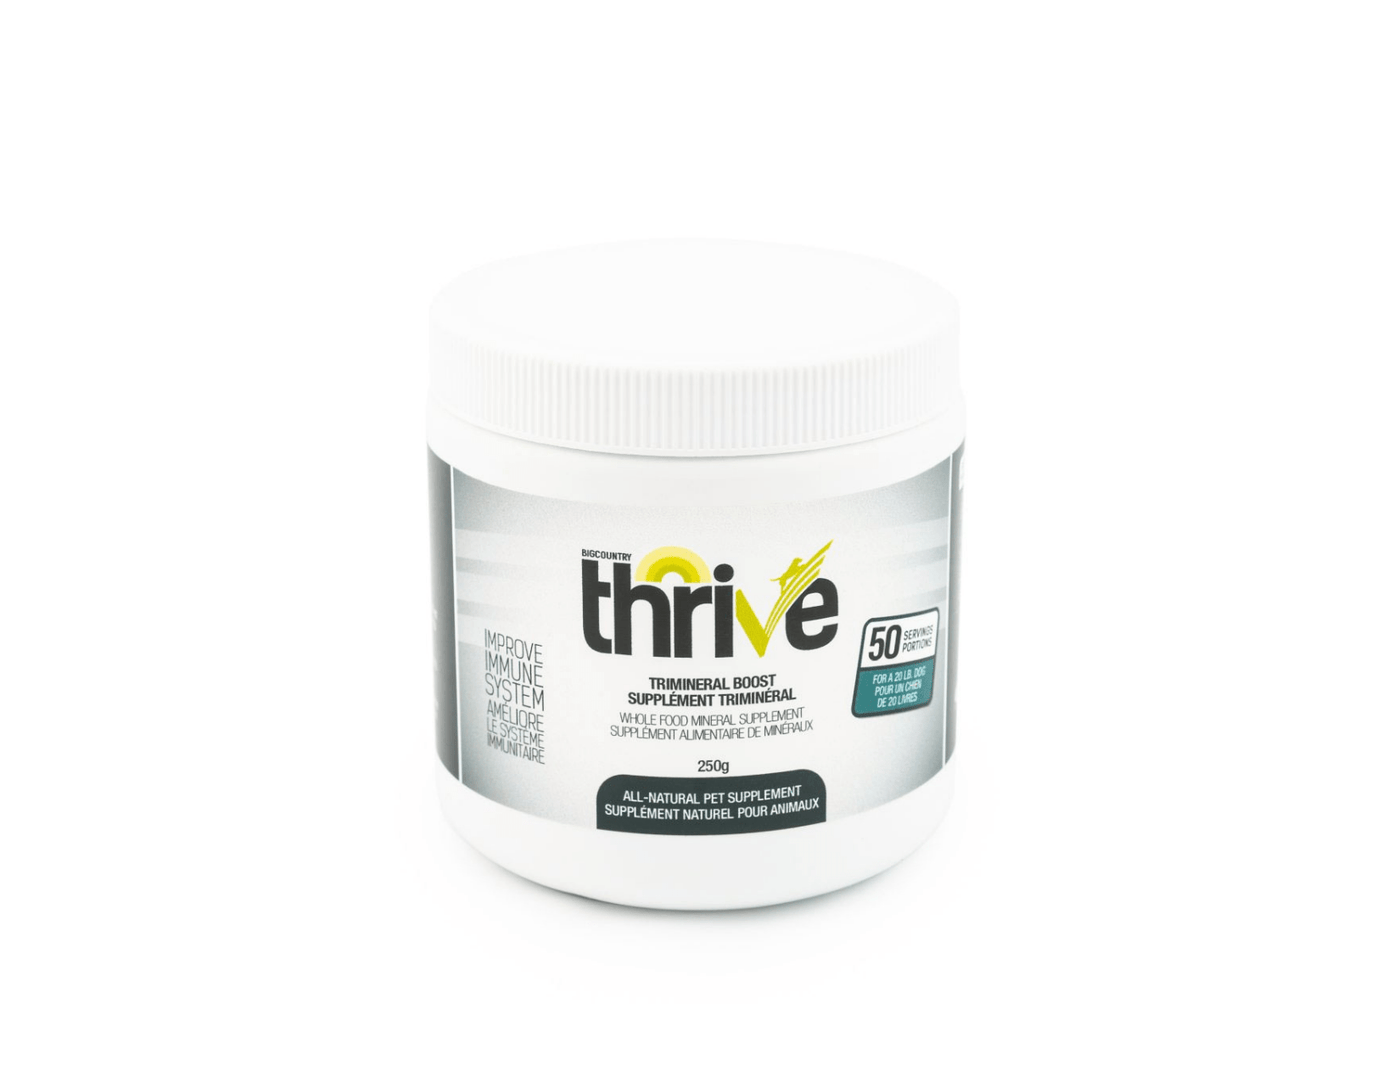 Trimineral Boost 250g - Thrive - PetToba-Thrive